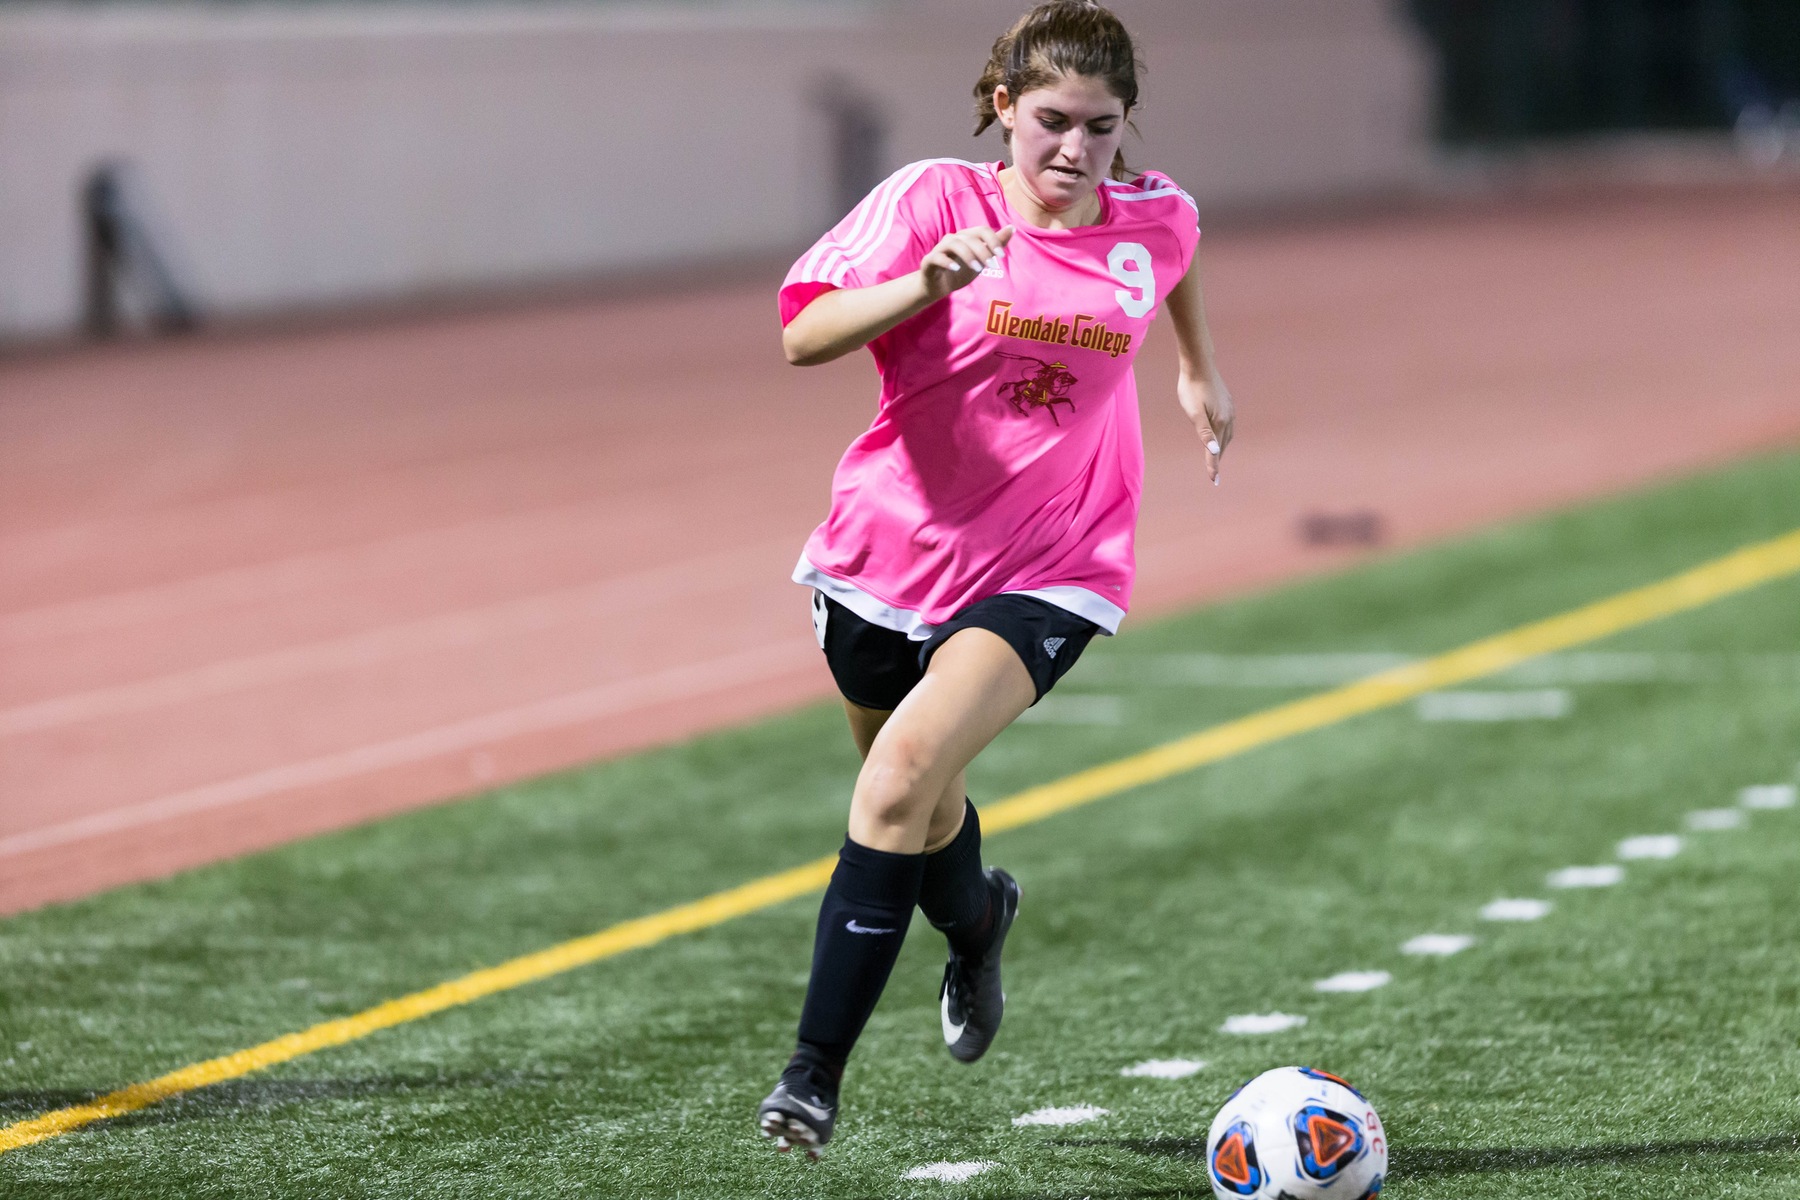 Women’s Soccer breezes through Victory Valley in a 6-1 victory.